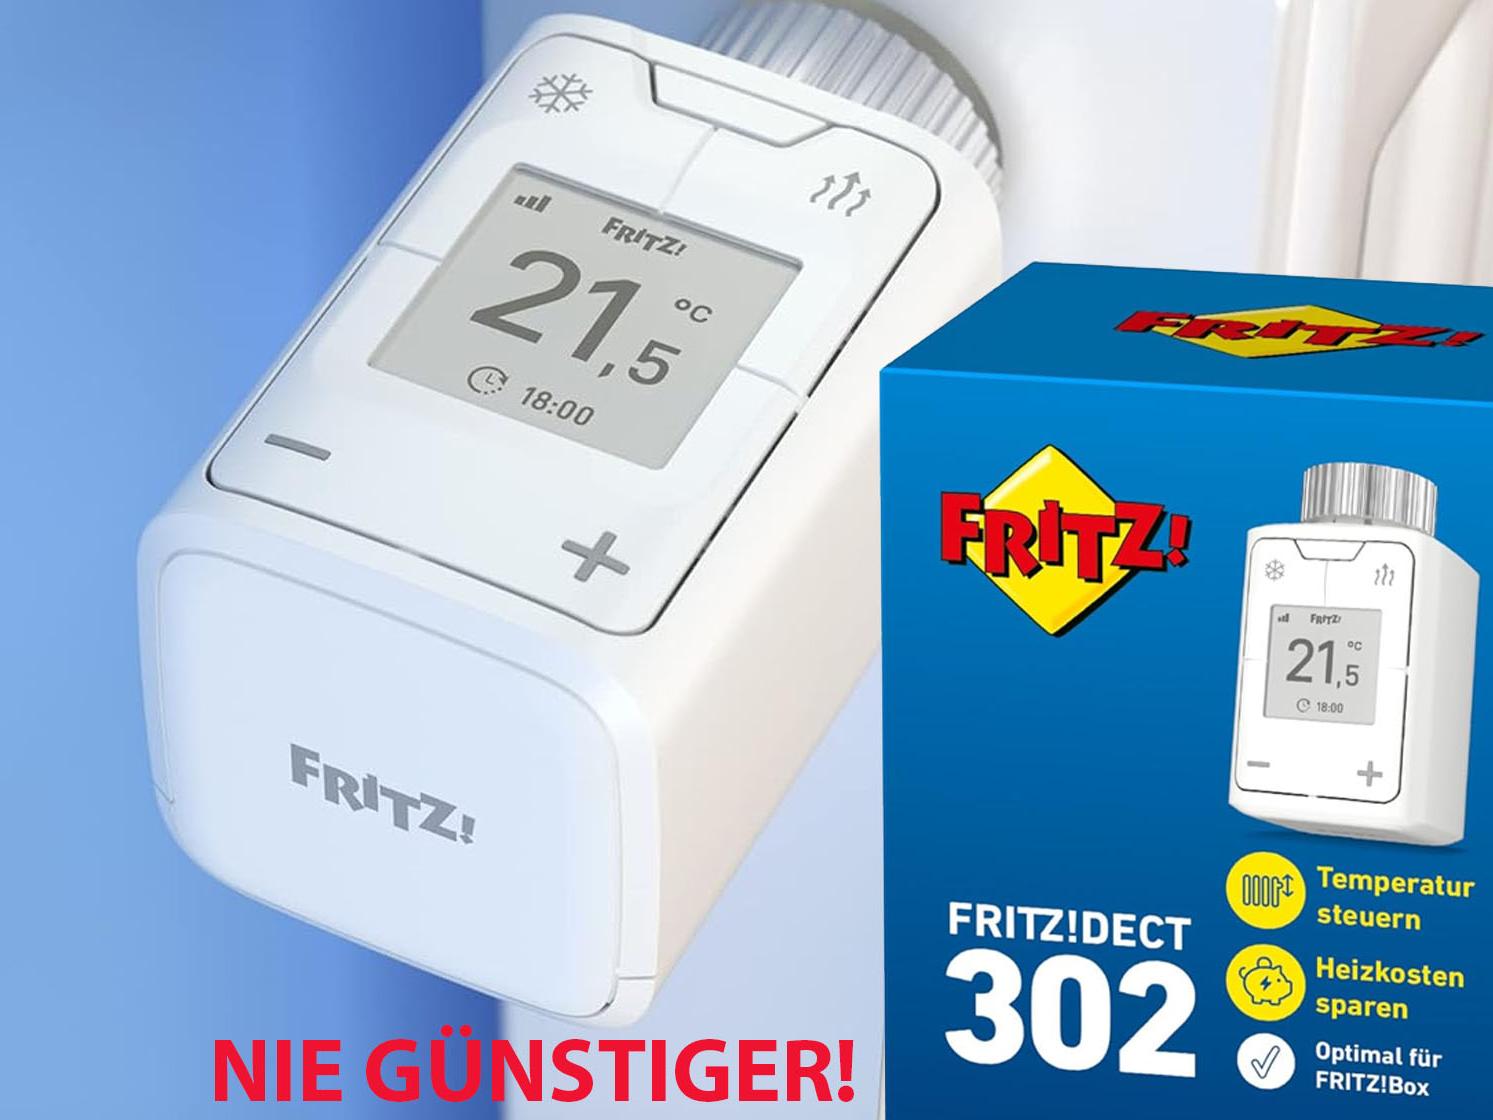 https://images.nordbayern.de/image/contentid/policy:1.14049157:1707903192/153%20AVM%20Fritz%20Dect%20302%20smarter%20Heizk%C3%B6rperregler.jpg?f=4%3A3&h=1536&m=FIT&w=2048&%24p%24f%24h%24m%24w=644242d